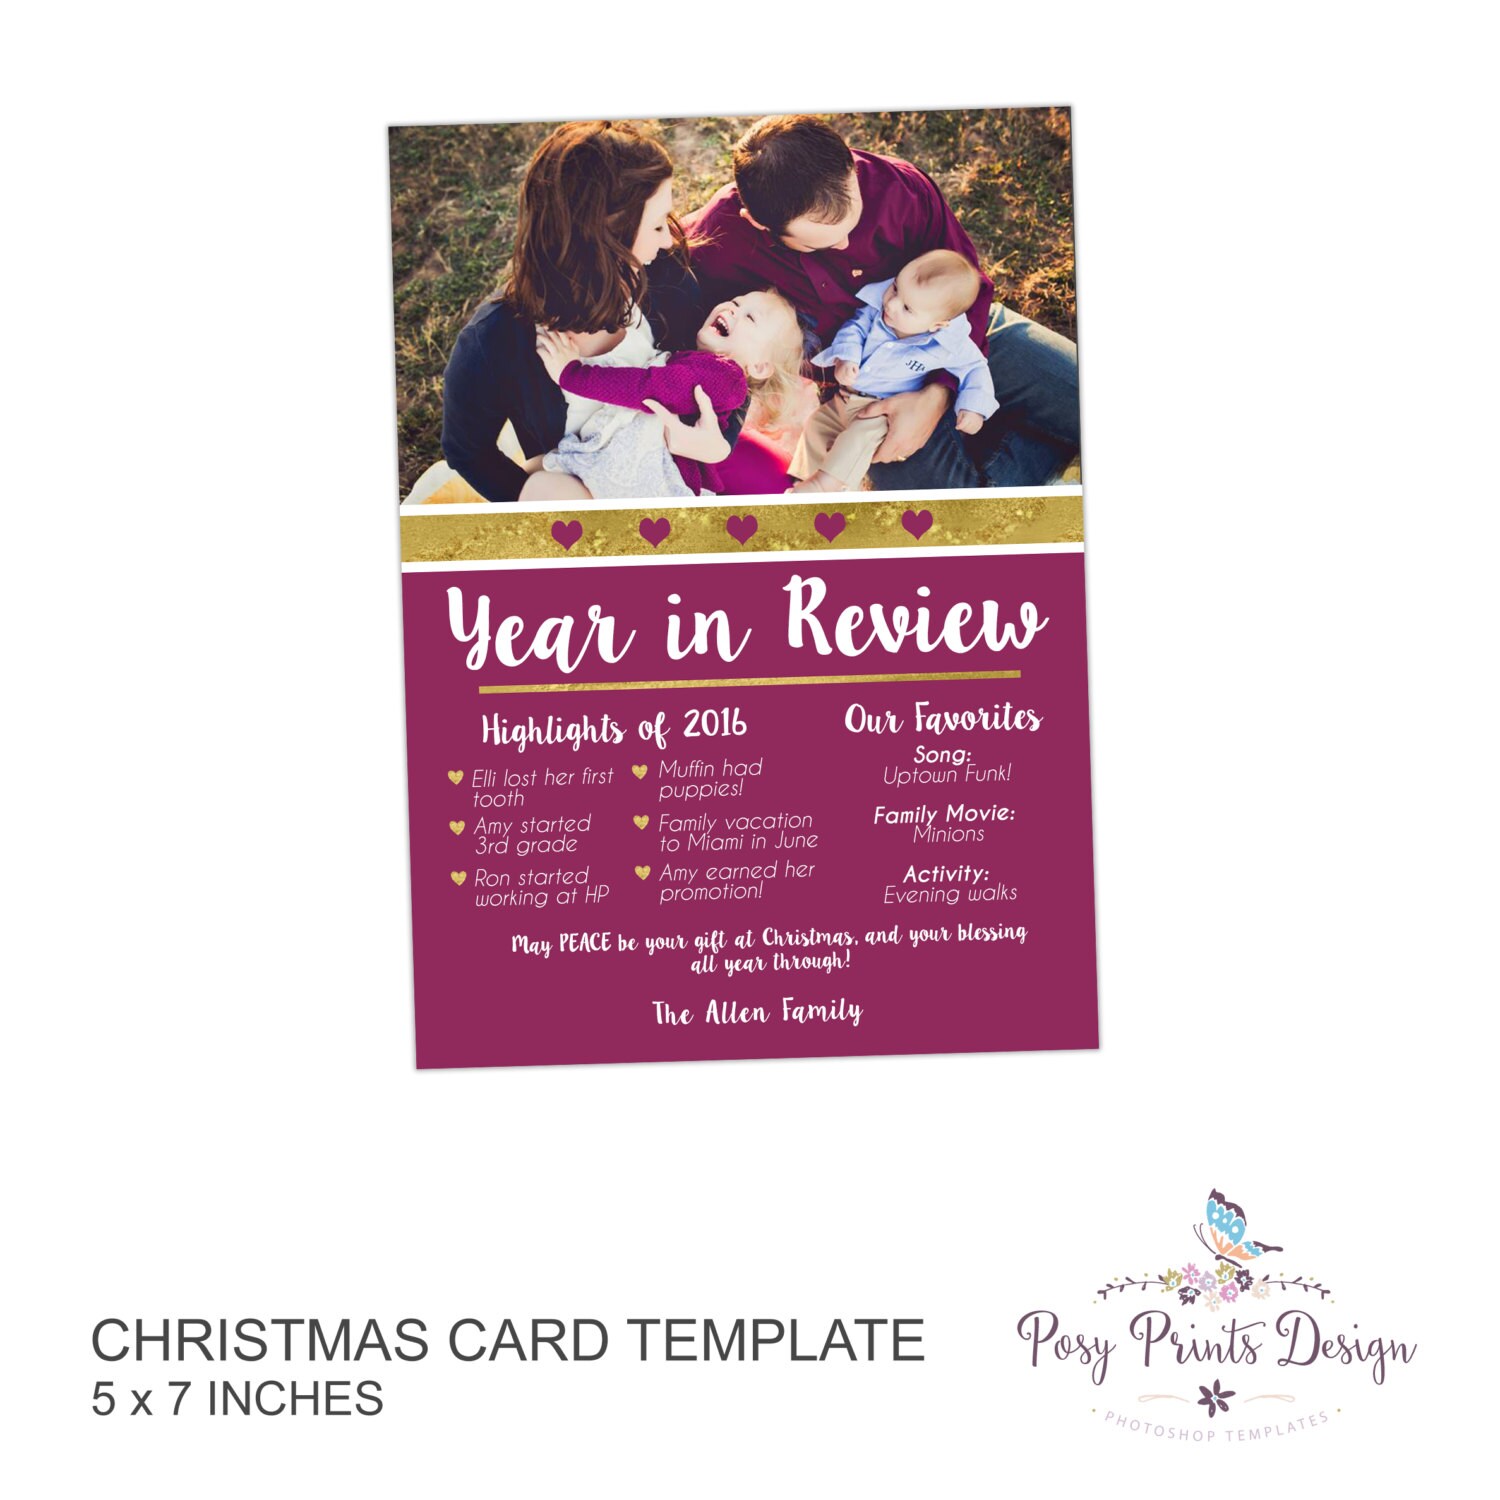 year-in-review-christmas-card-template-5x7-photo-card